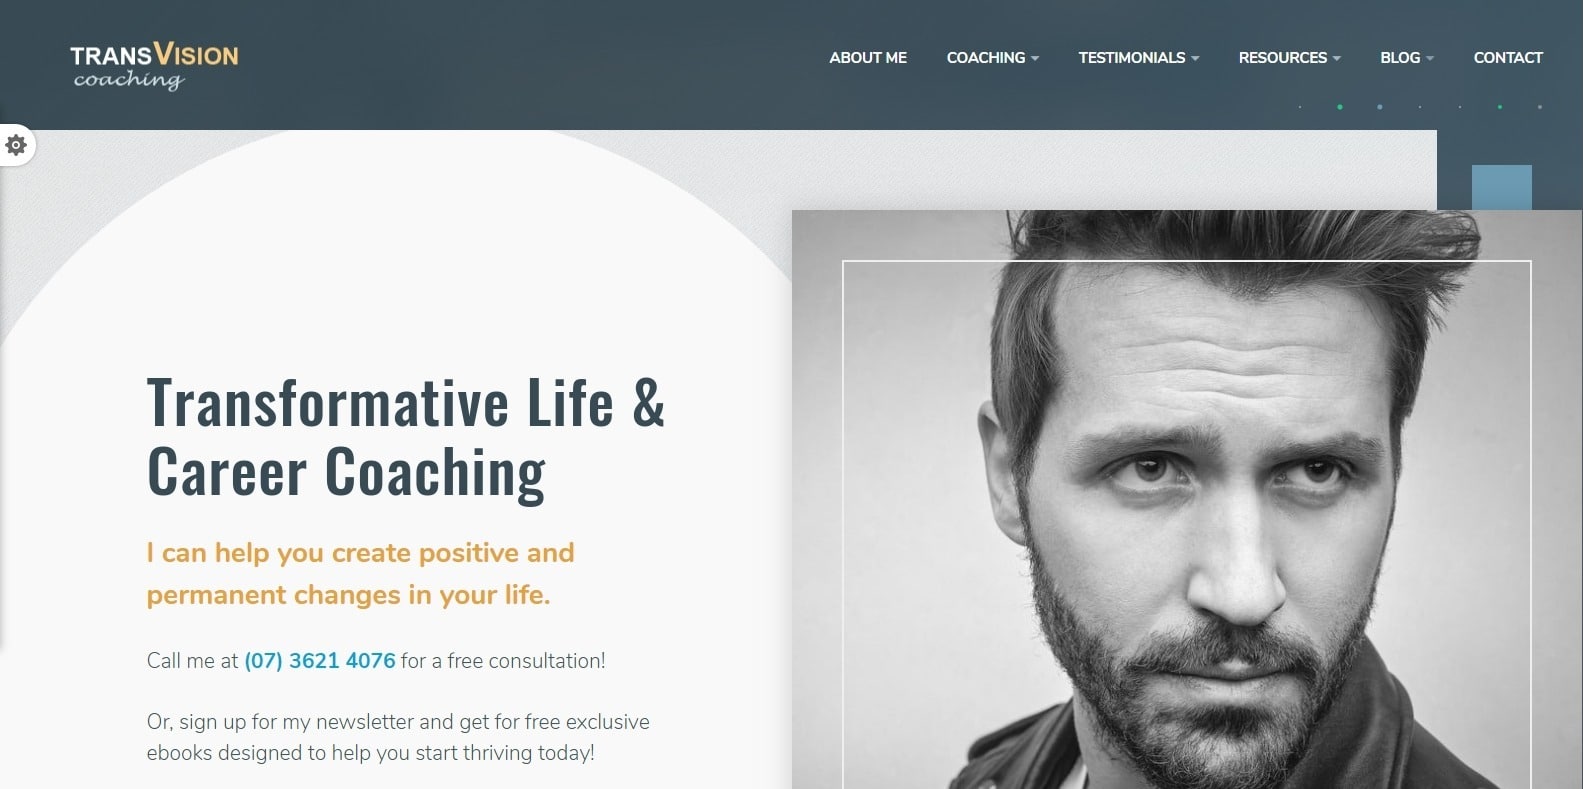 transvision-coaching-website template